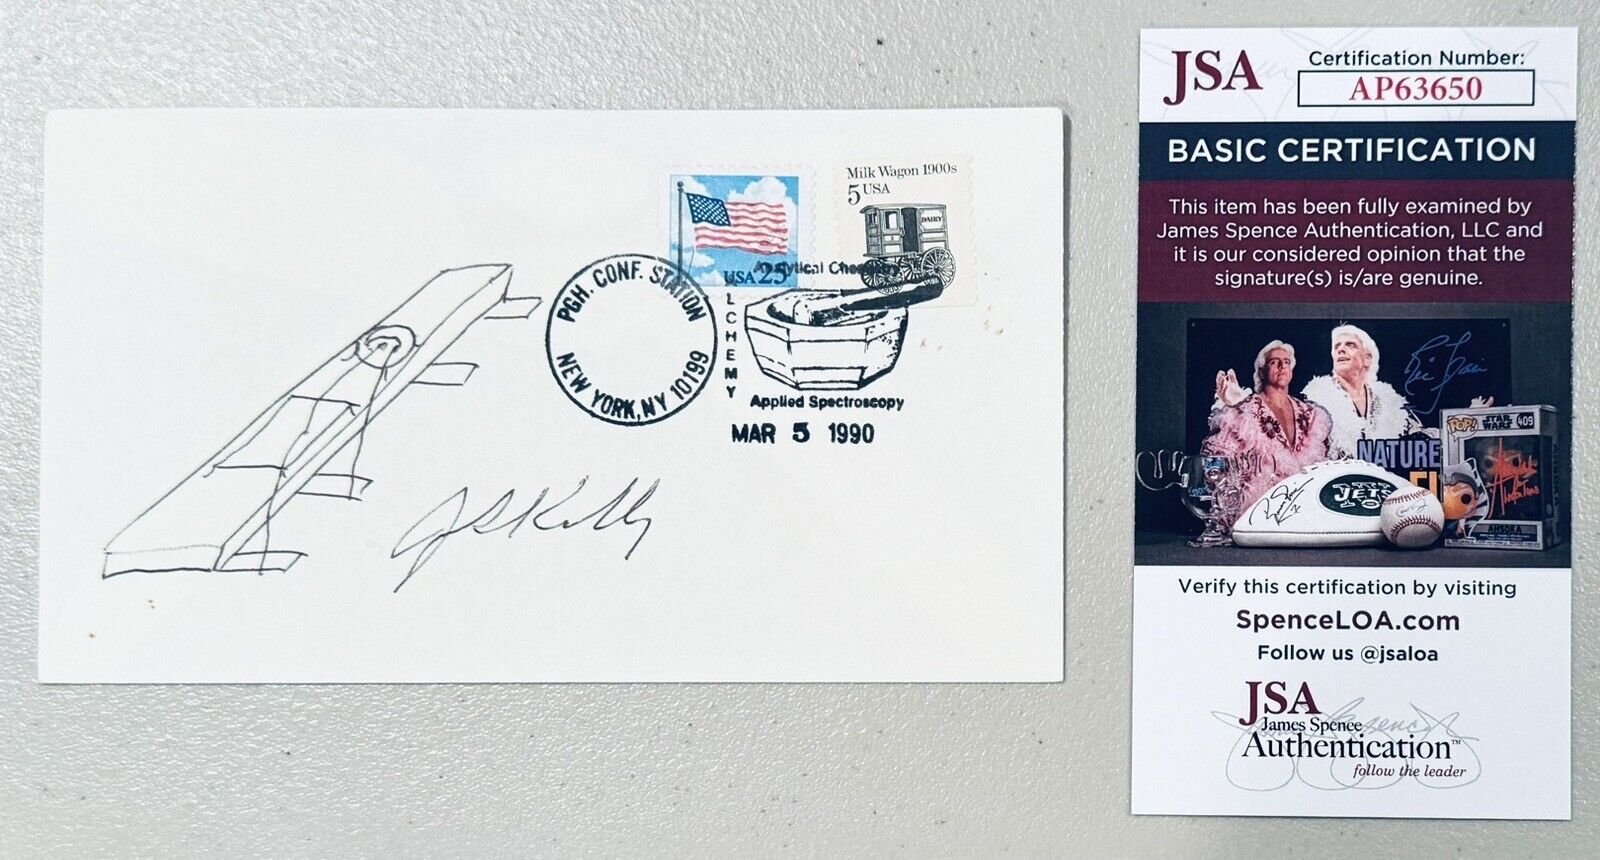 Rusty Schweickart Signed Autographed First Day Cover JSA Astronaut Apollo 9 1